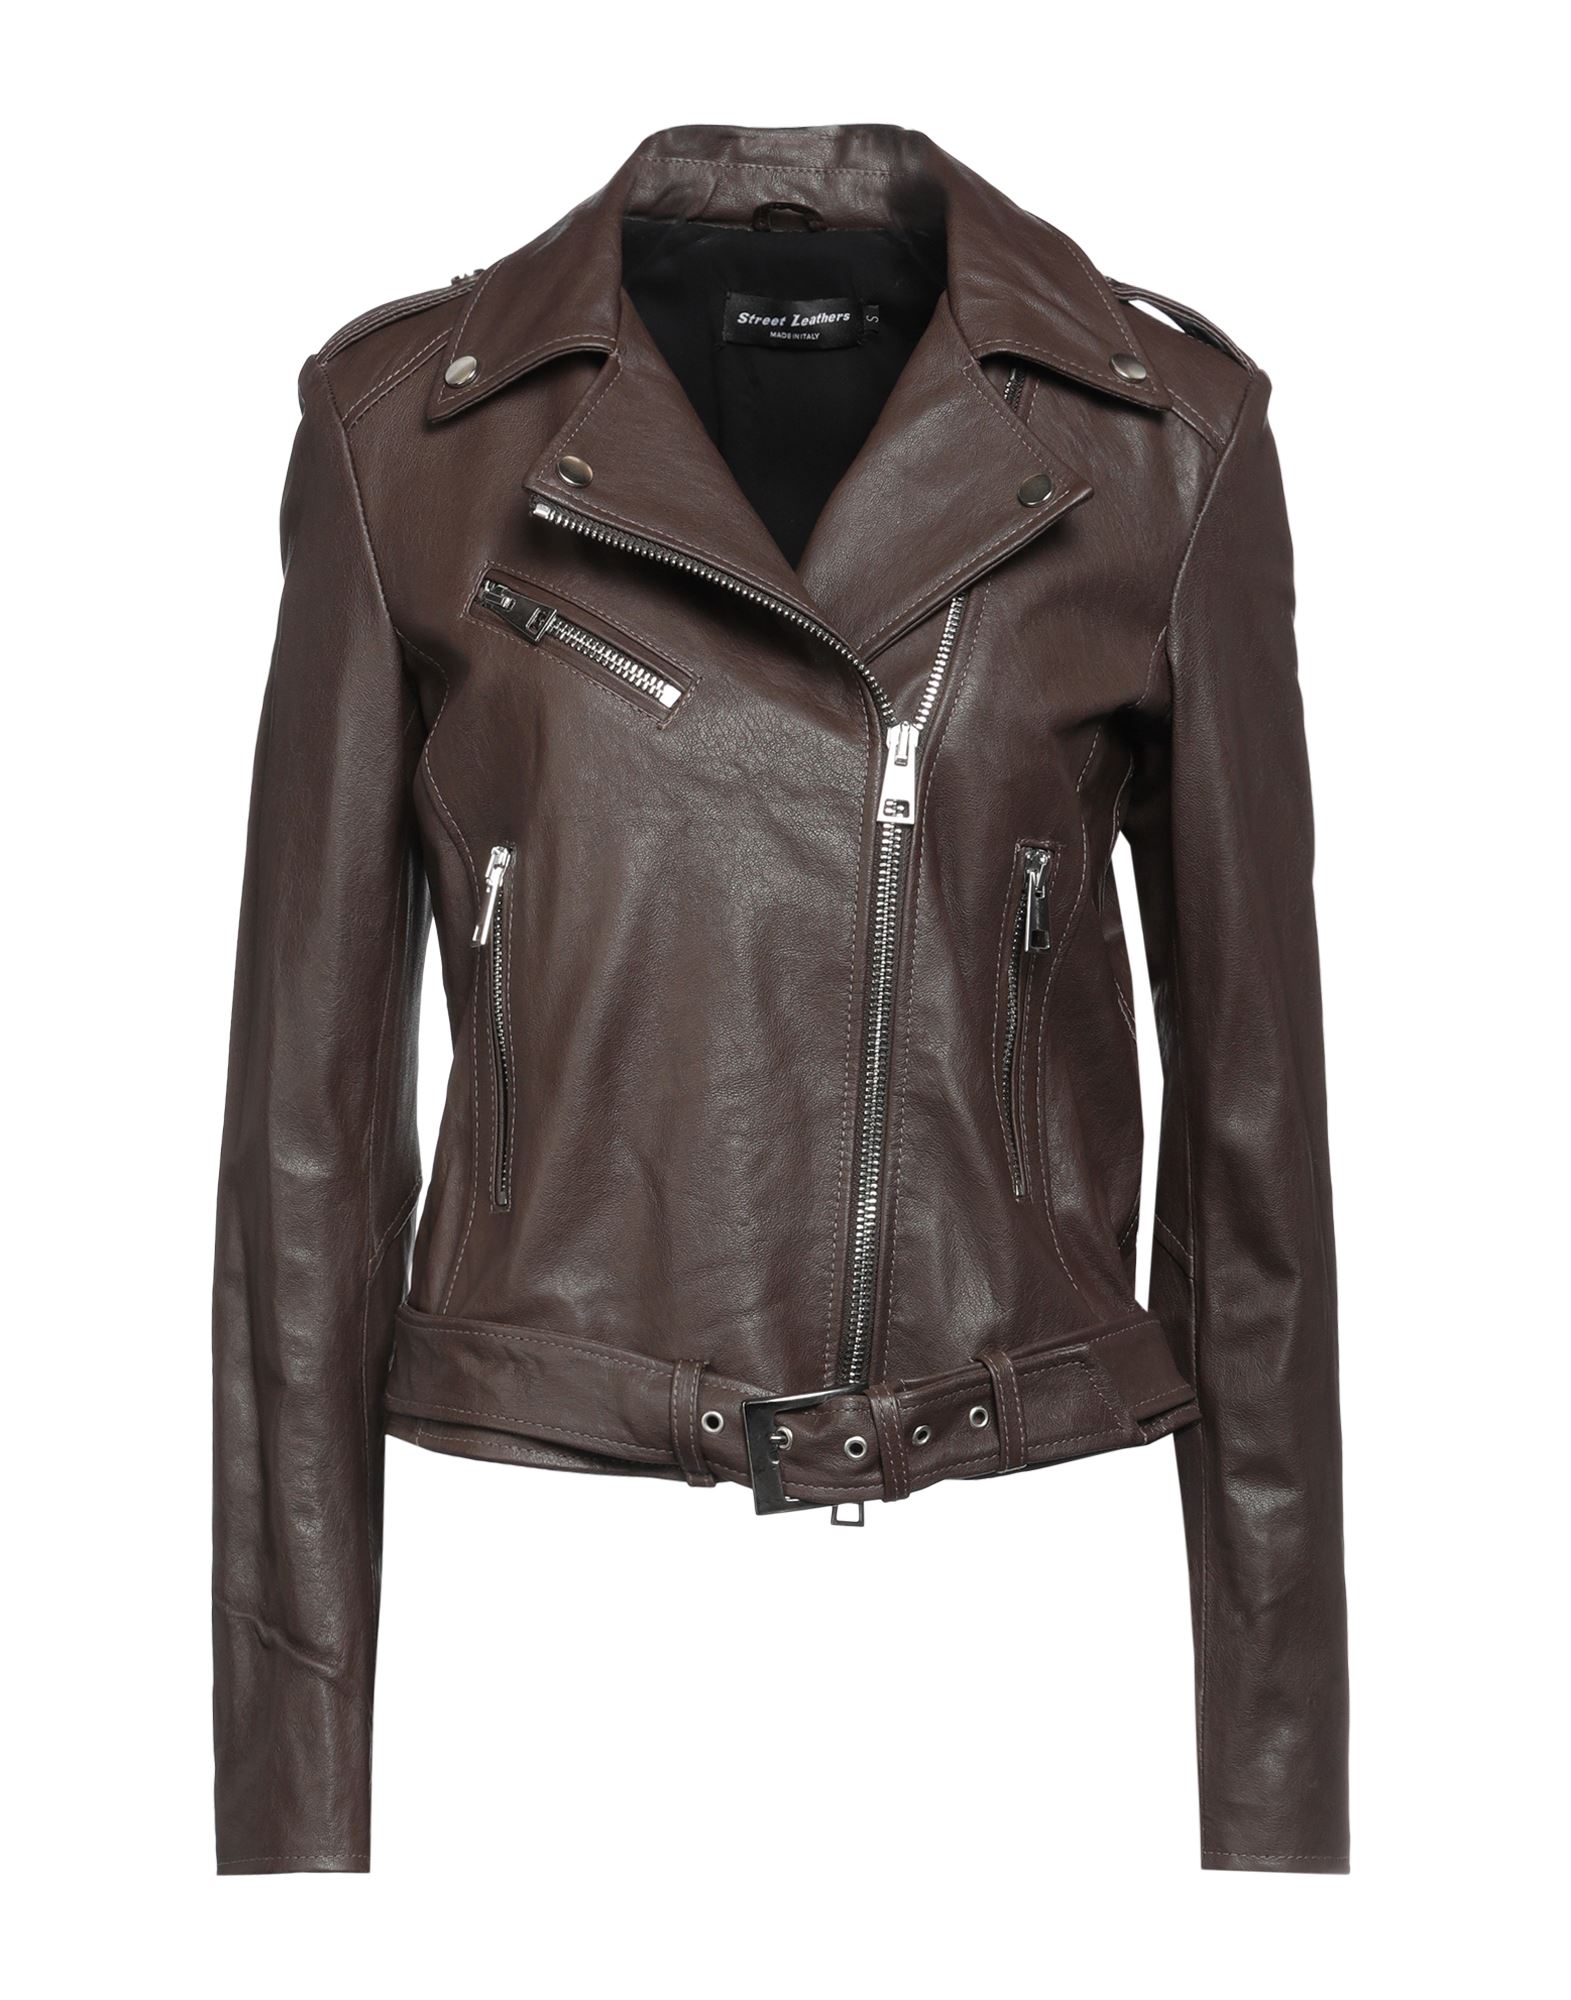 STREET LEATHERS STREET LEATHERS WOMAN JACKET DARK BROWN SIZE S SOFT LEATHER